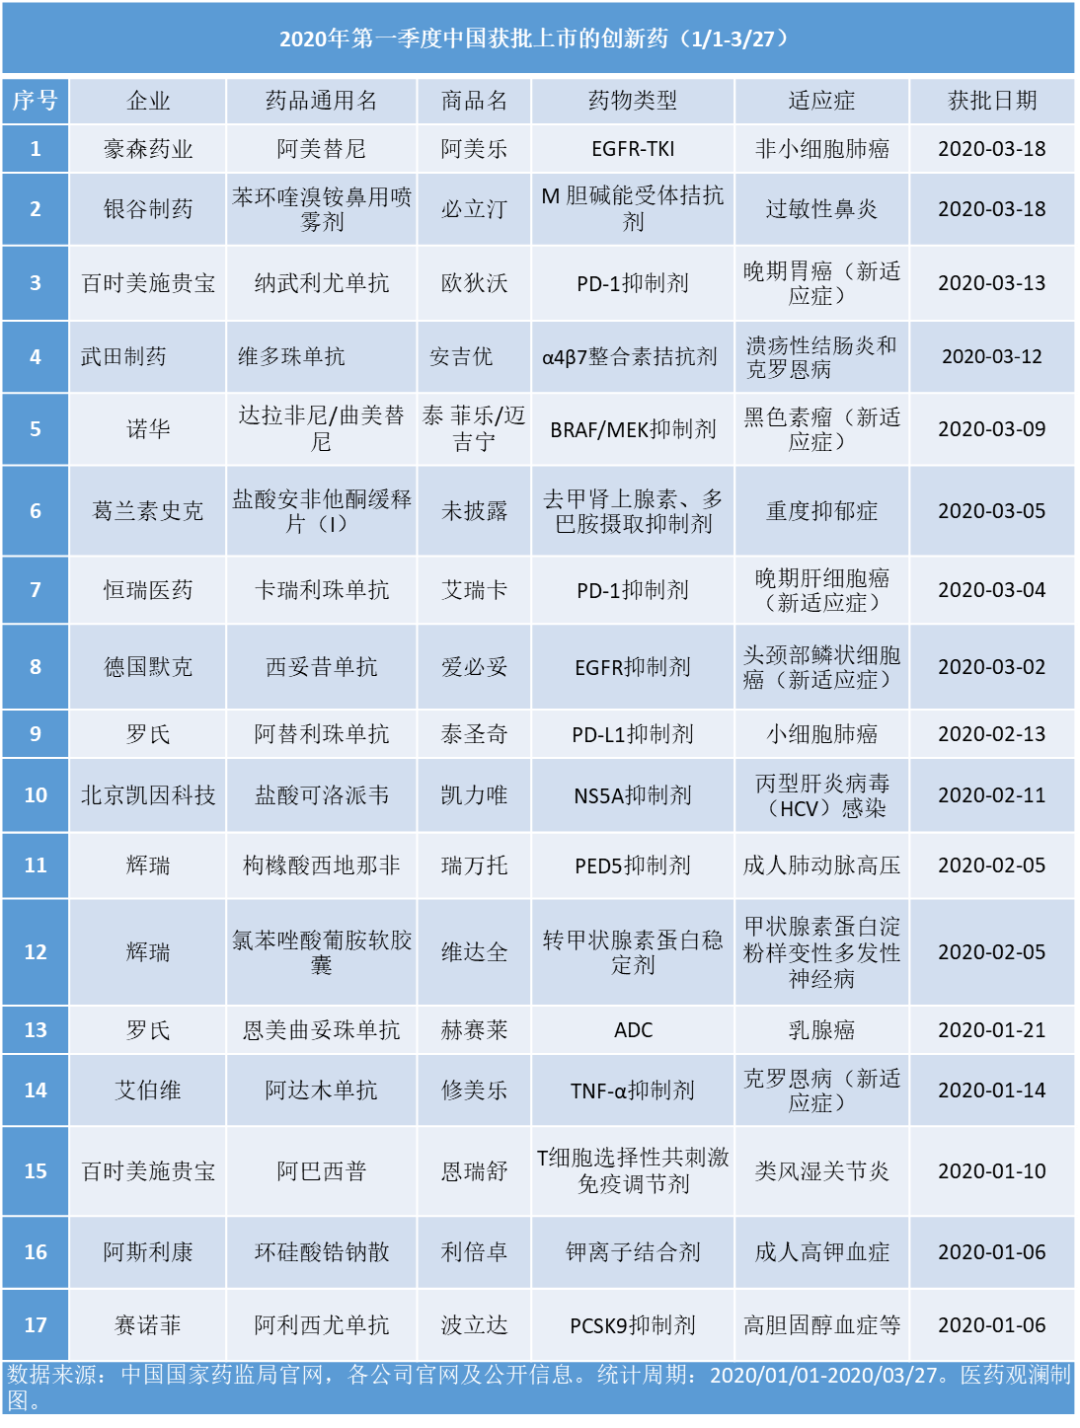 NMPA：2020年第1季度批准<font color="red">的</font>新药信息汇总